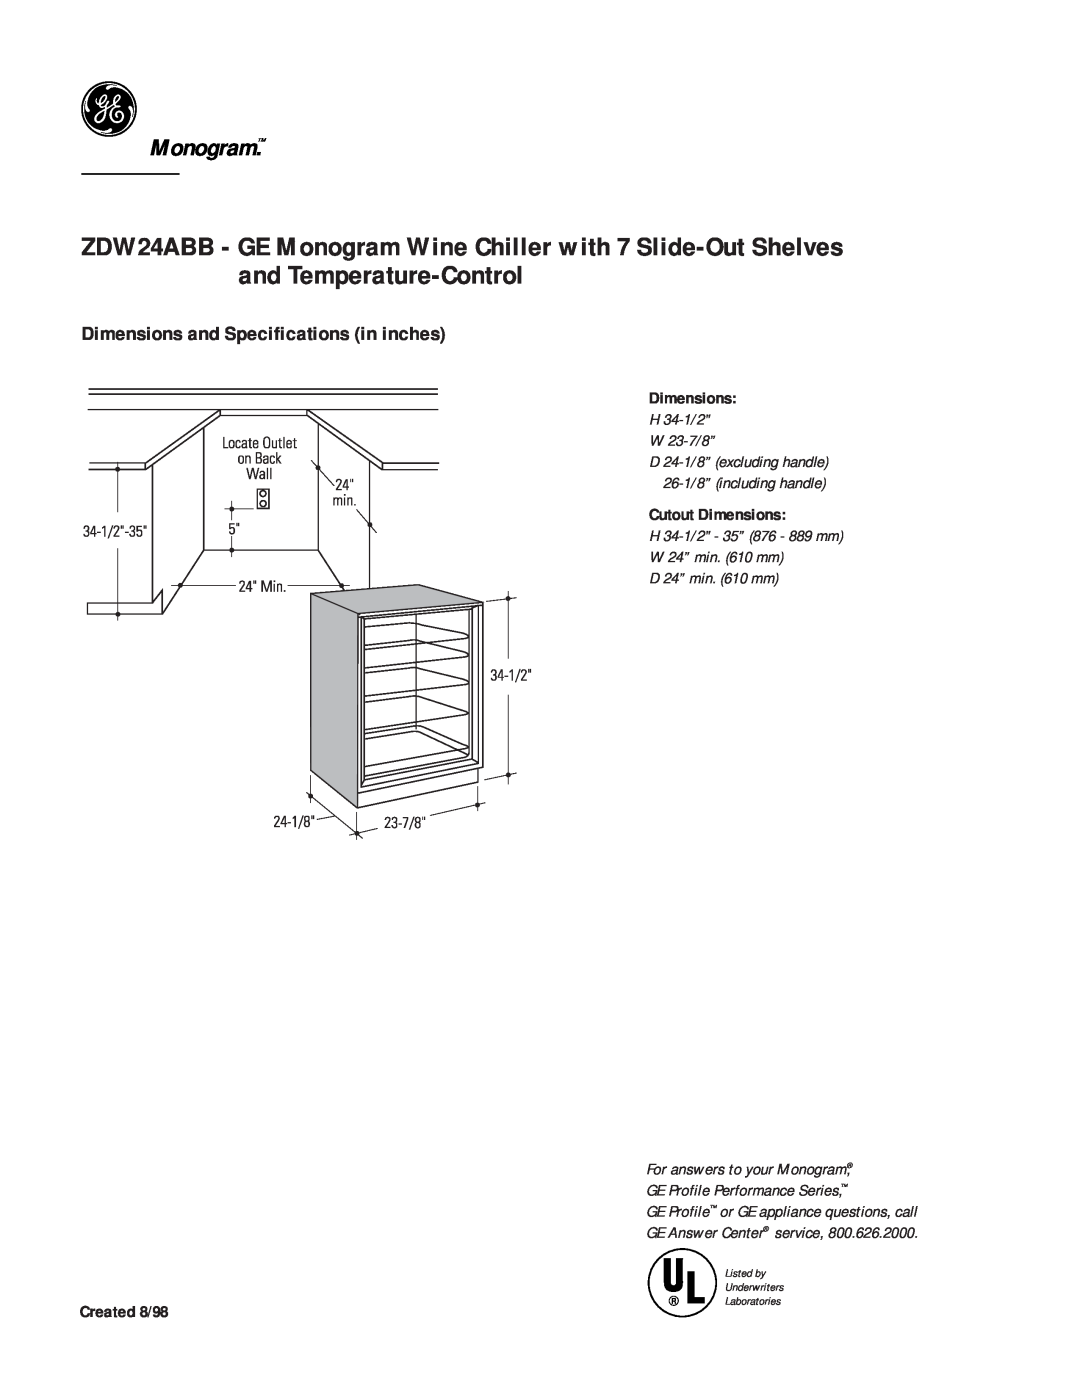 GE ZDW24ABB dimensions Monogram, Dimensions and Specifications in inches, Cutout Dimensions, Created 8/98 